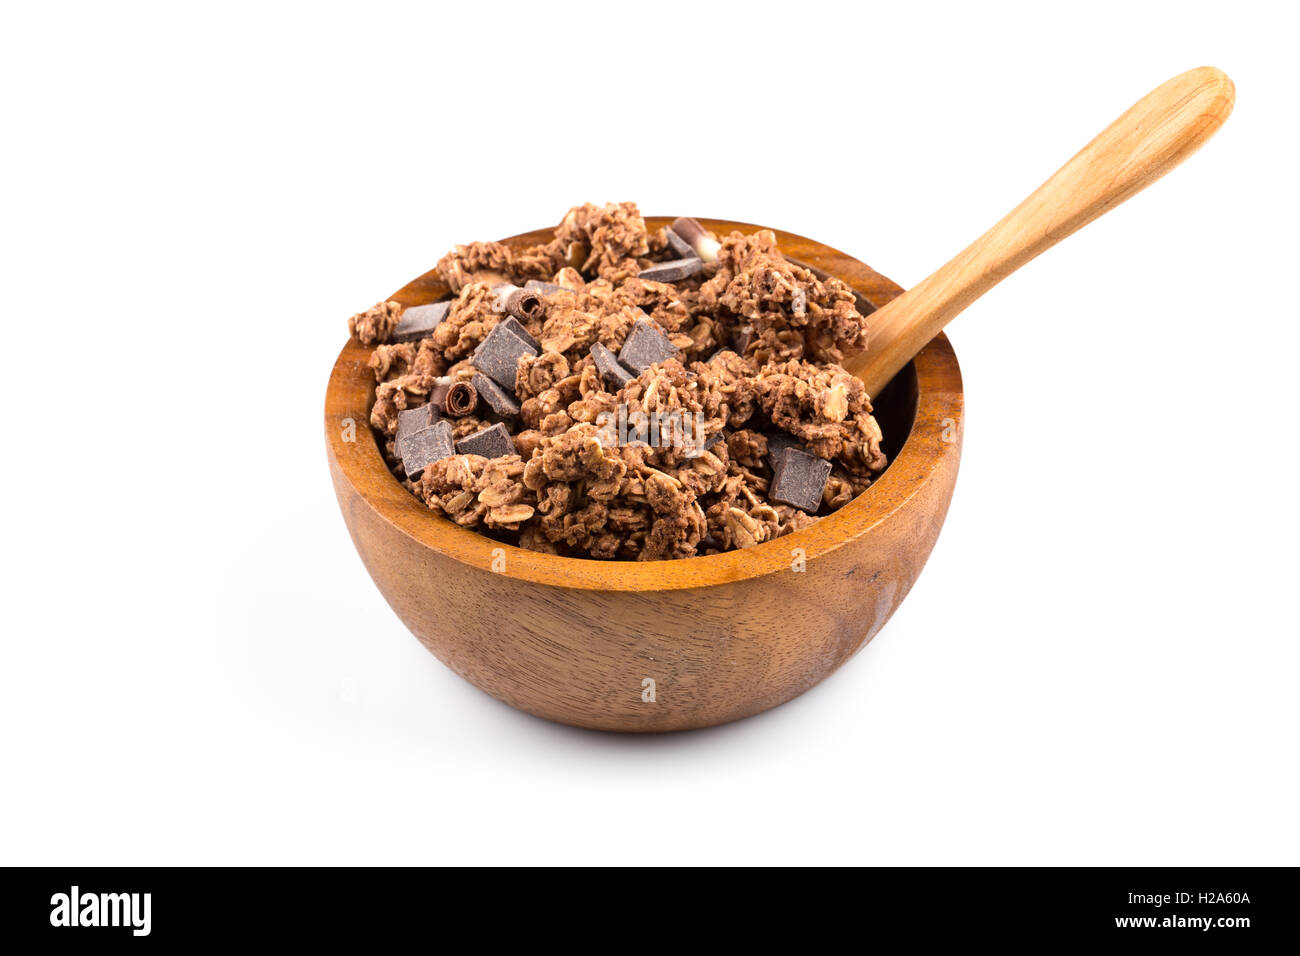 Close up of chocolate muesli with pieces of chocolate in a bowl on